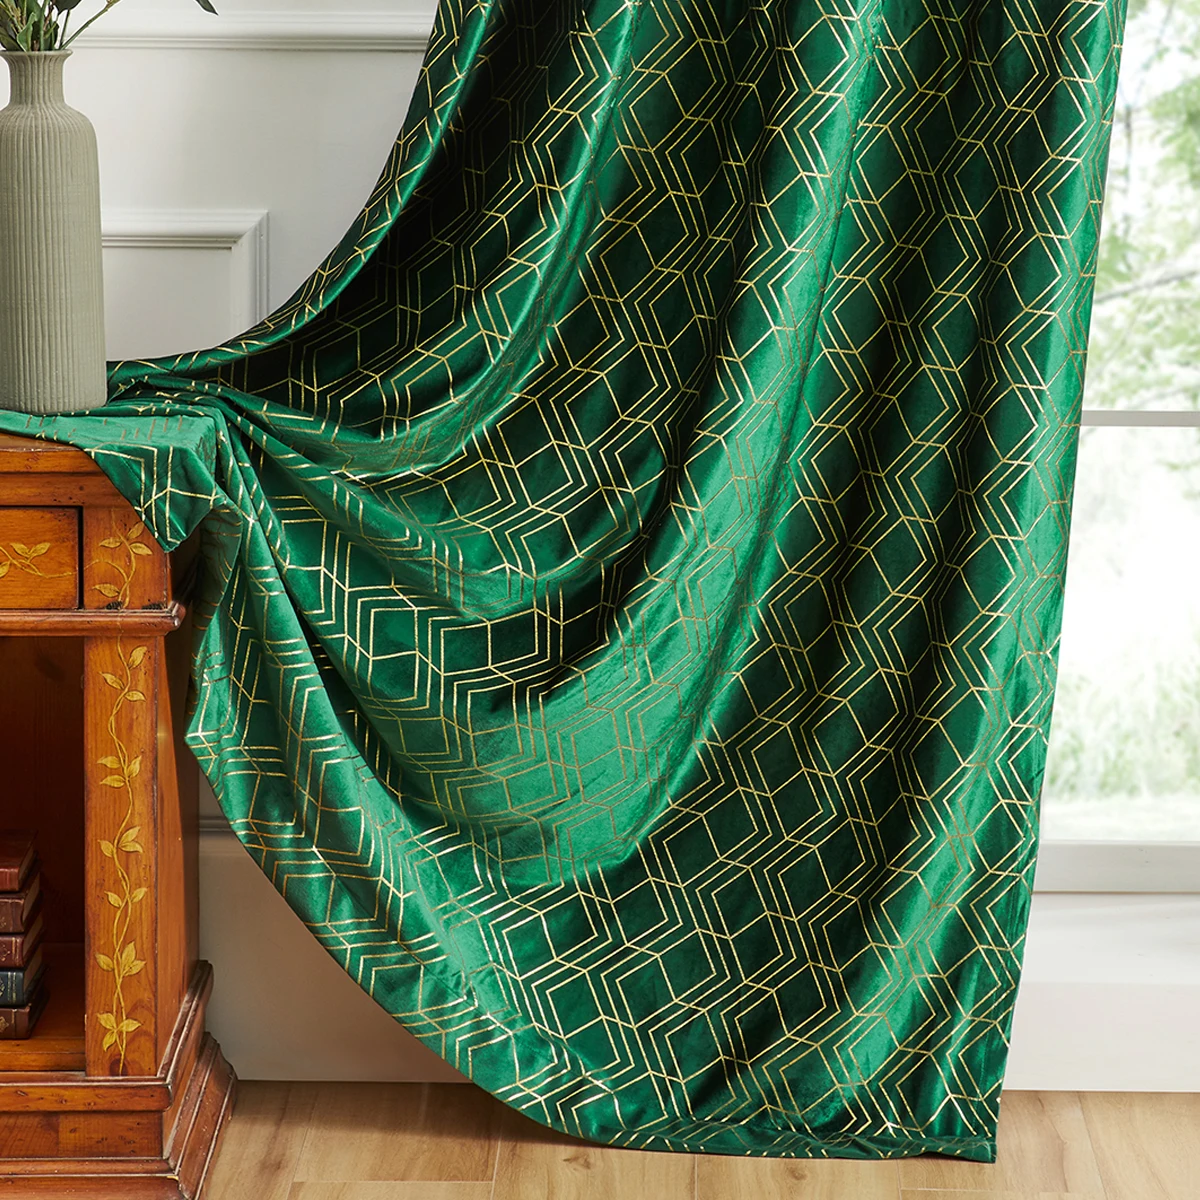 Modern Golden Geometric Velvet Curtain for The Living Room Bedroom Blackout Black Curtains On the Window Door White Green Black curtains for sale Curtains